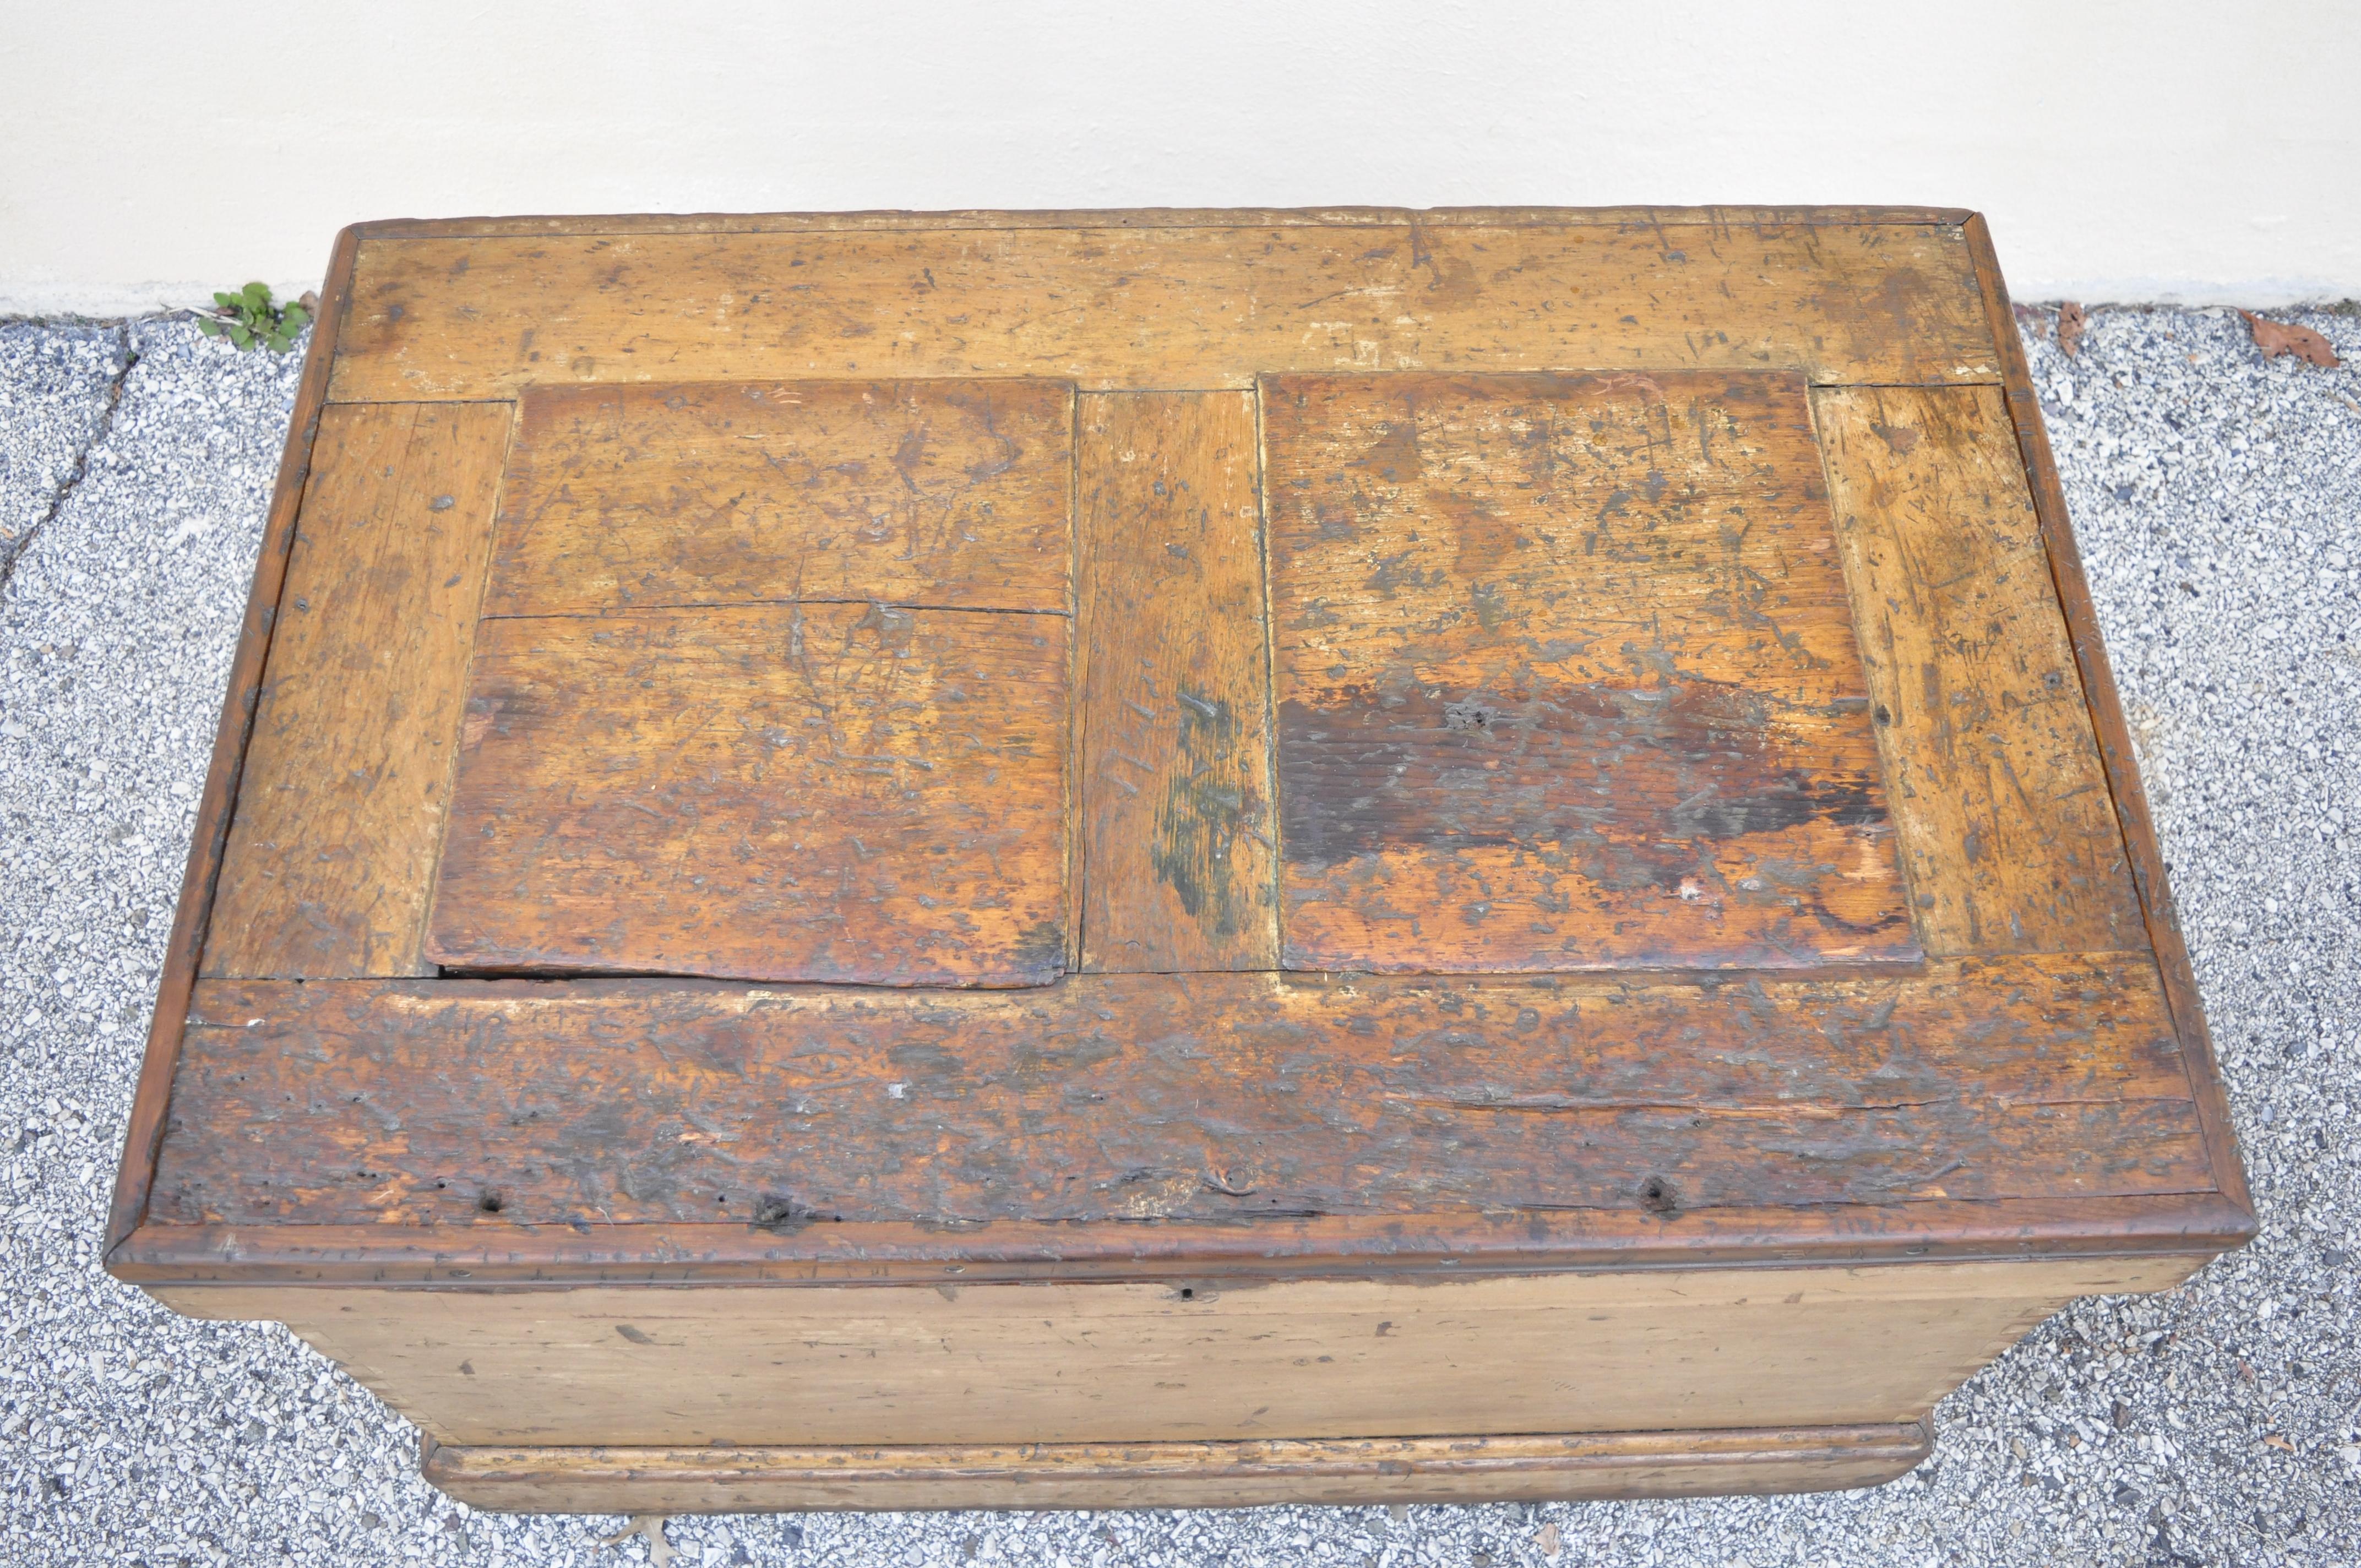 Antique 19th C Hand Painted Distressed Wood Blanket Chest Dovetail Trunk In Good Condition For Sale In Philadelphia, PA